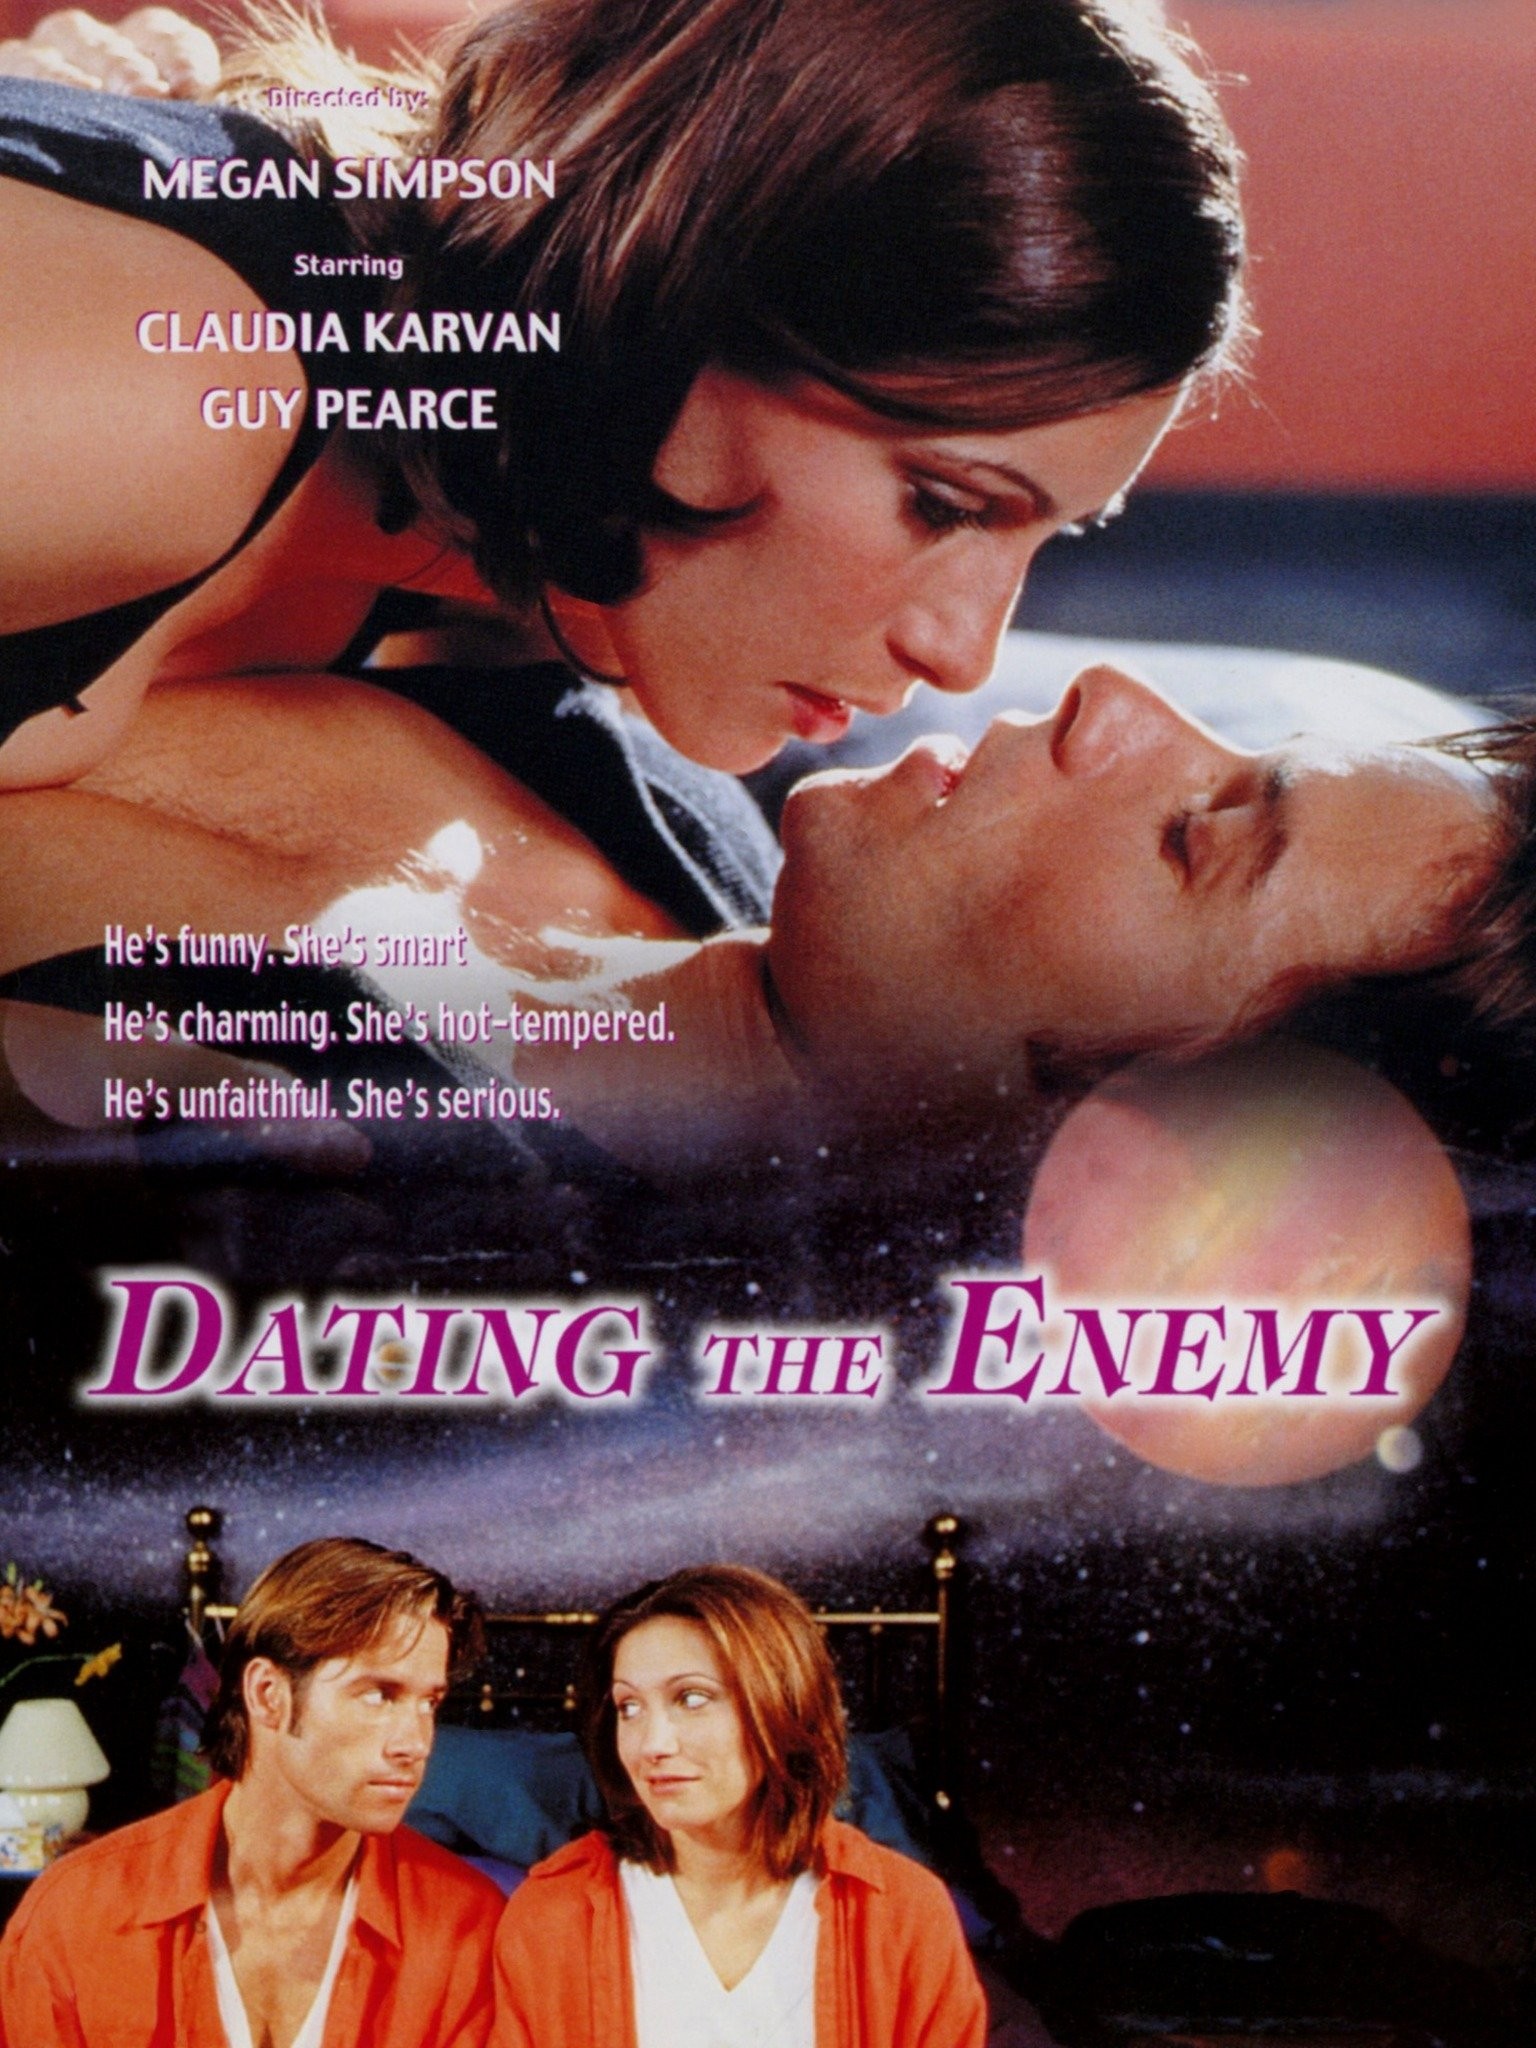 Sleeping With the Enemy - Rotten Tomatoes